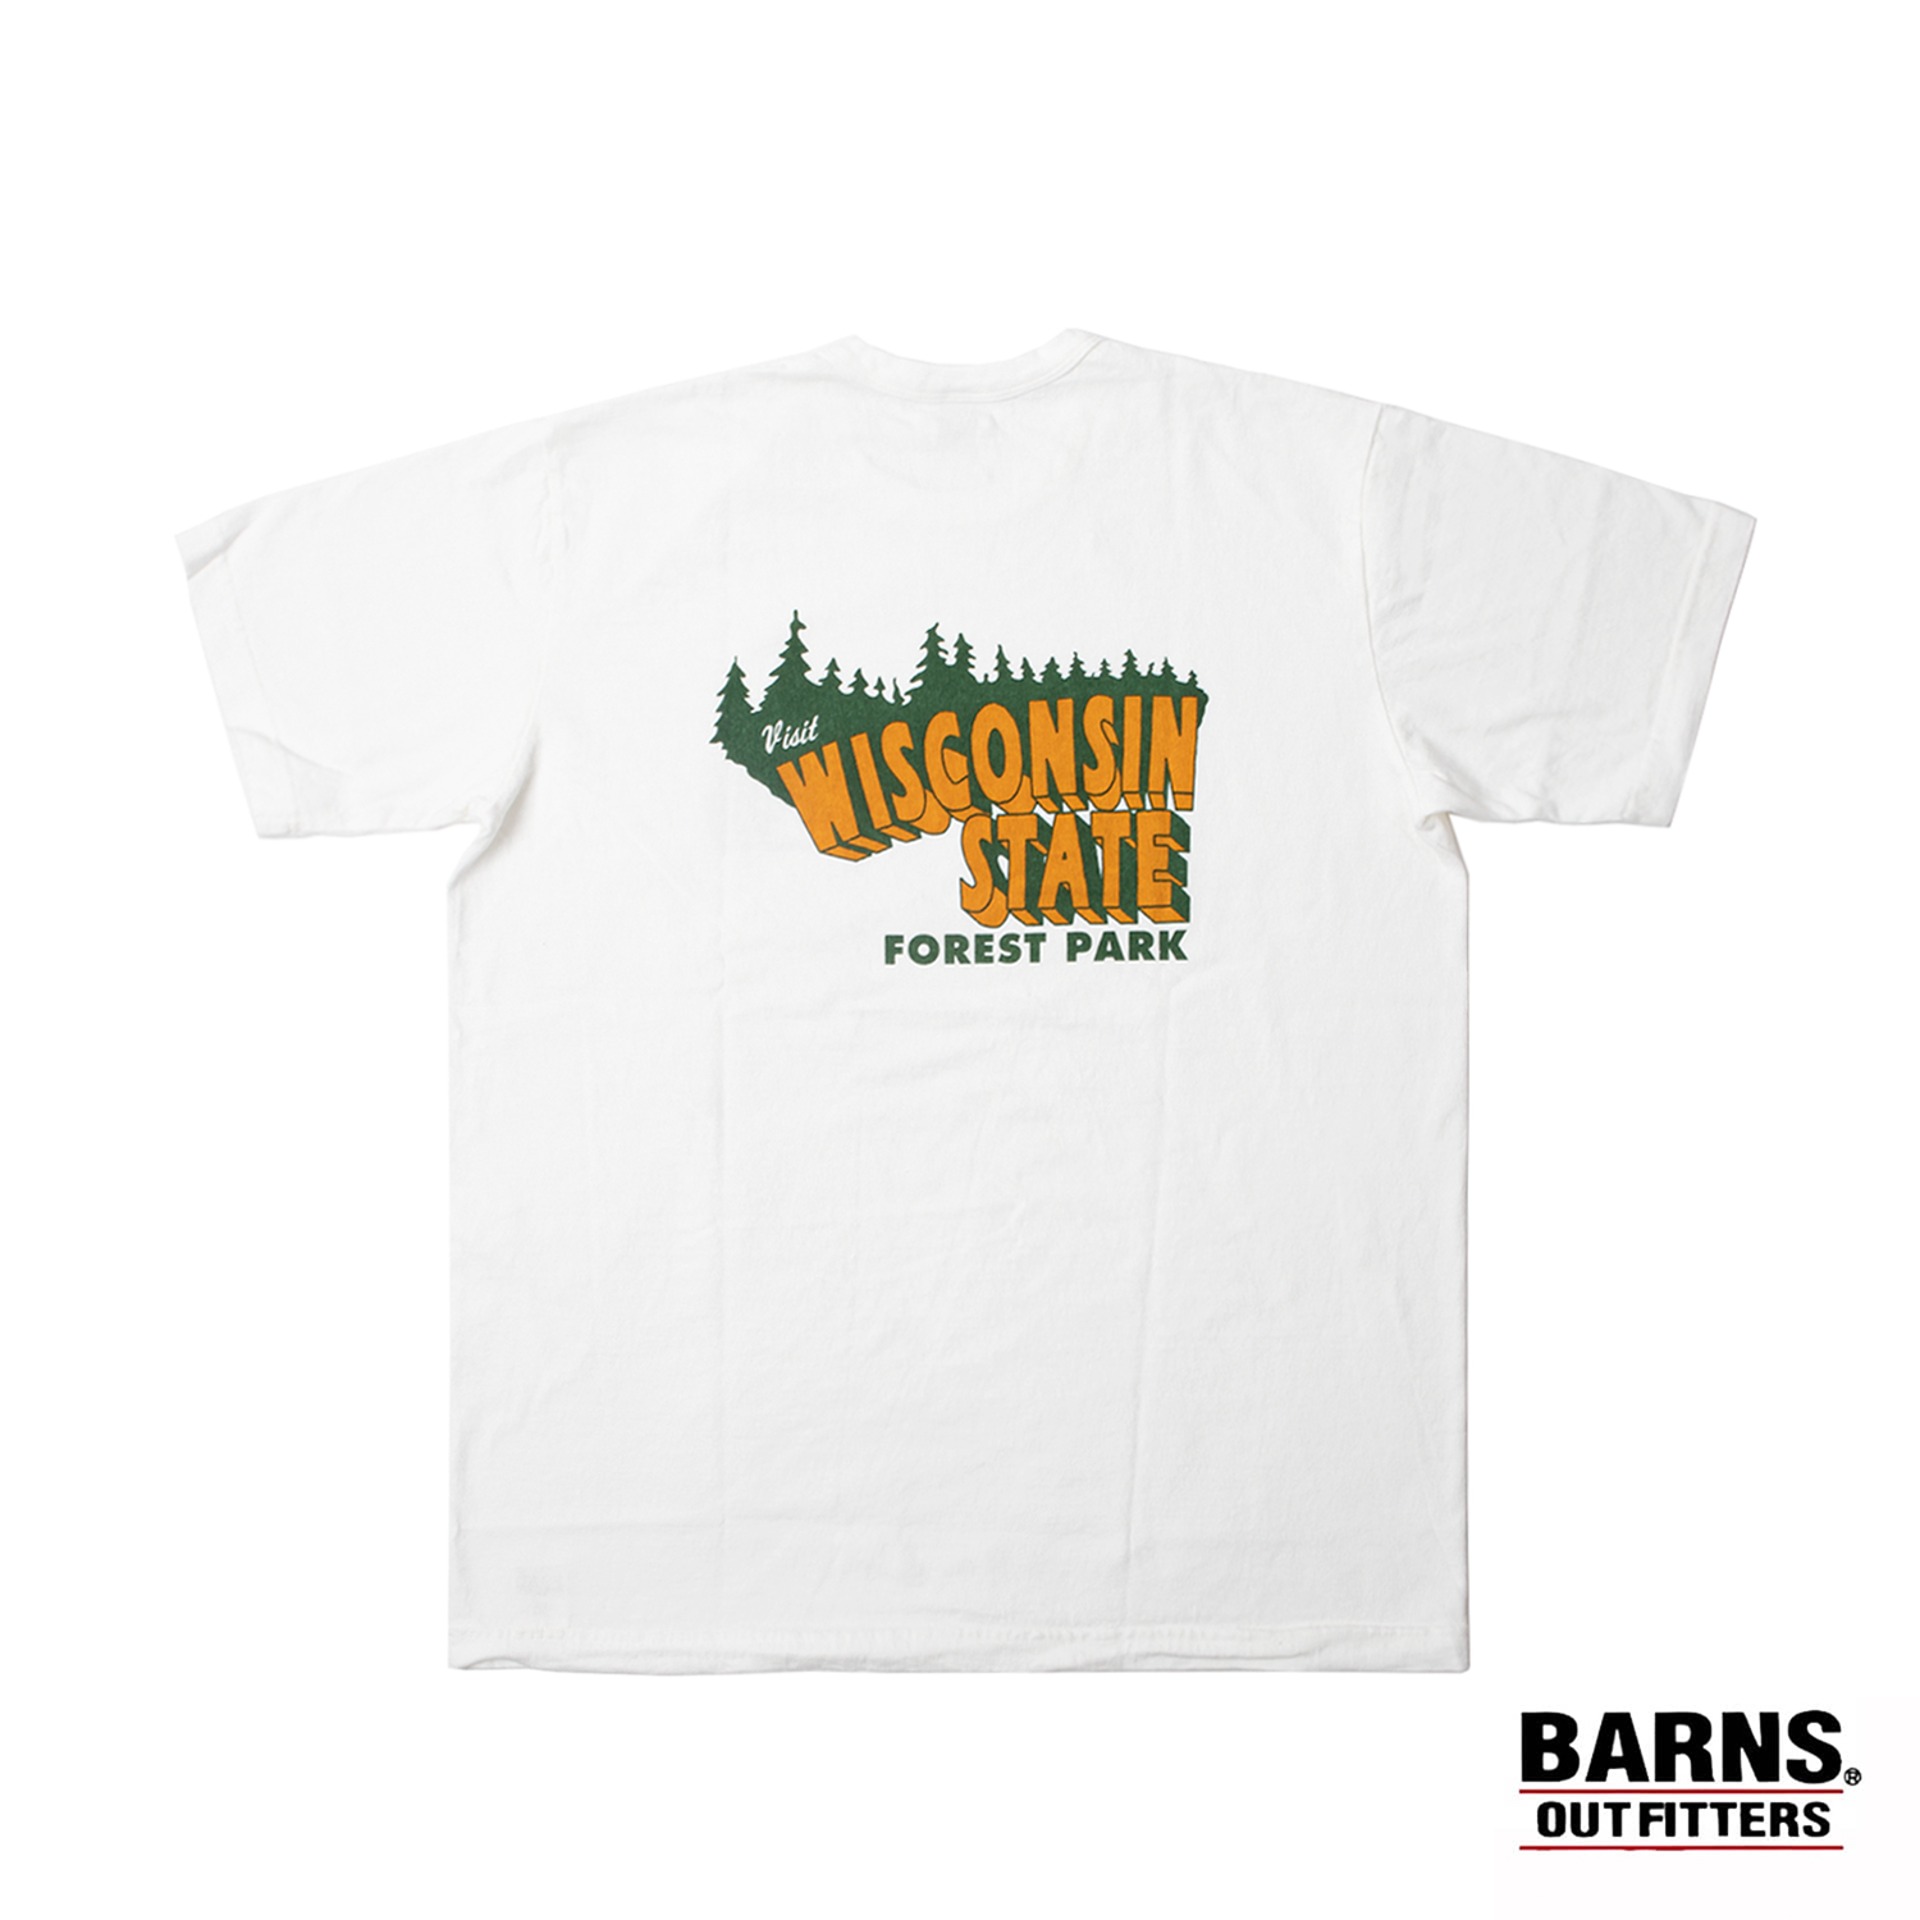 VINTAGE LIKE SS PT-T SHIRT WISCONSIN STATE (White)